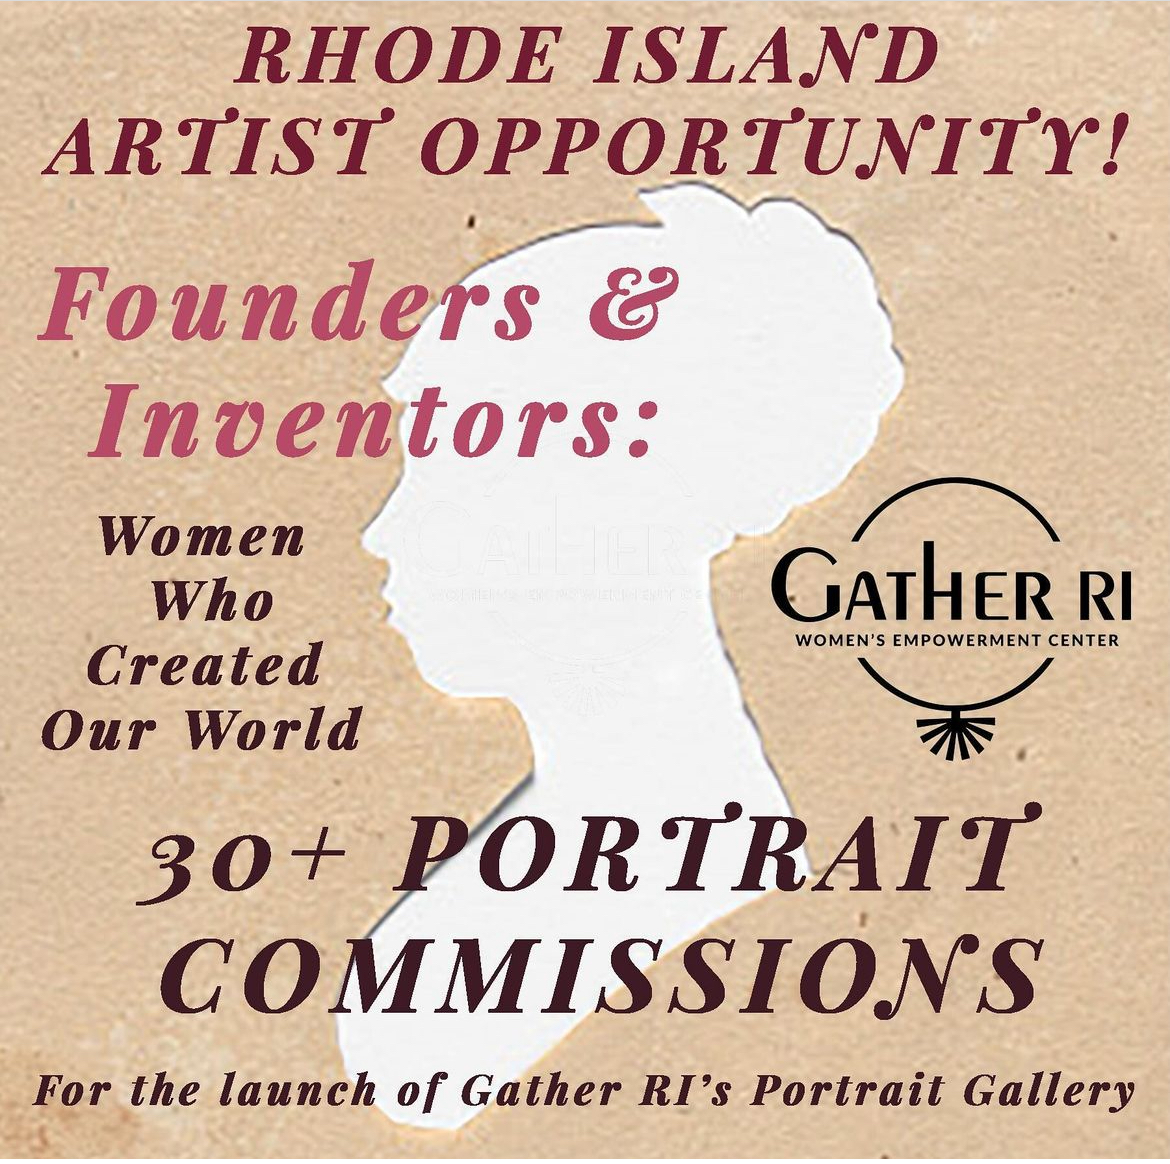 Rhode Island artist opportunity. 30+ portrait commissions for Founders & Inventors art show at Gather RI